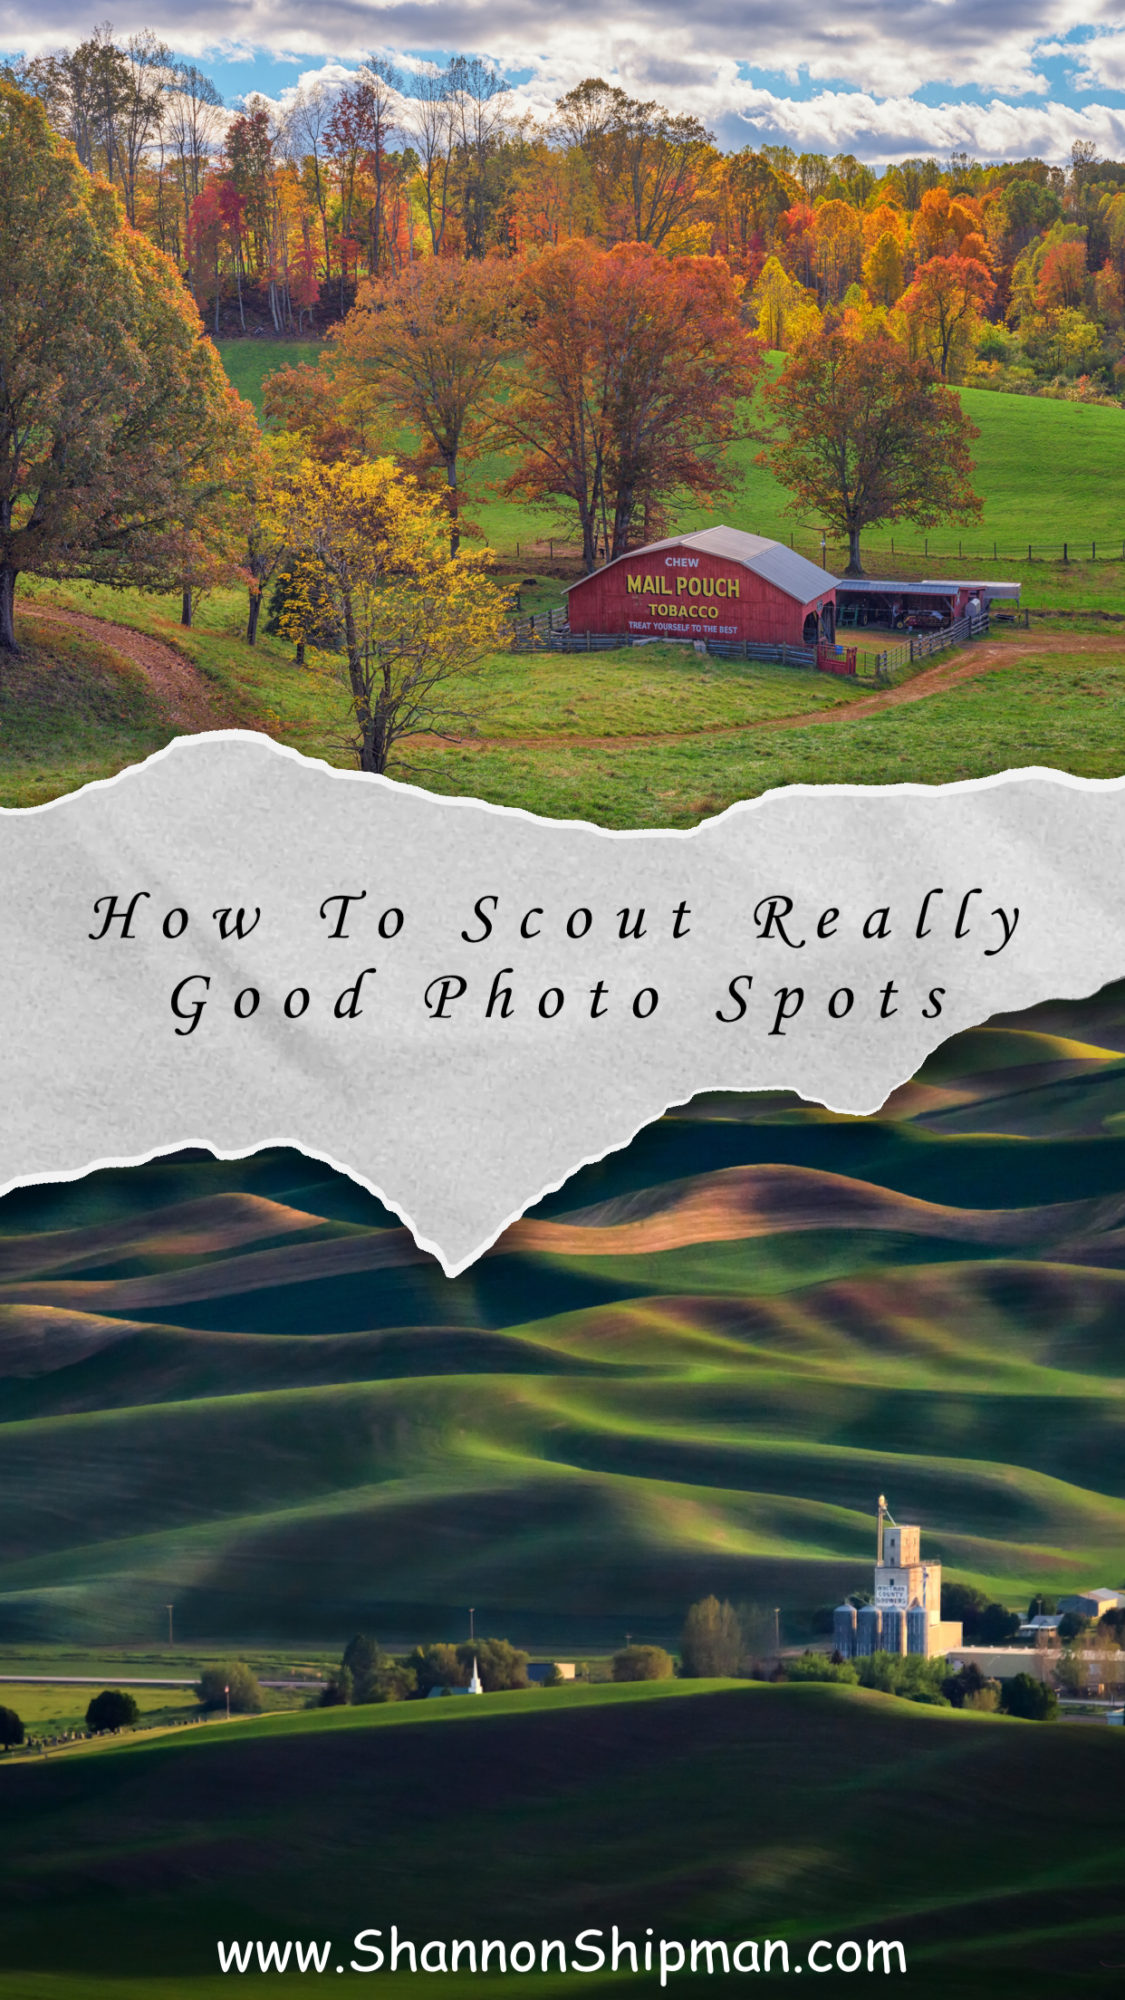 How to Scout Really Good Photo Spots